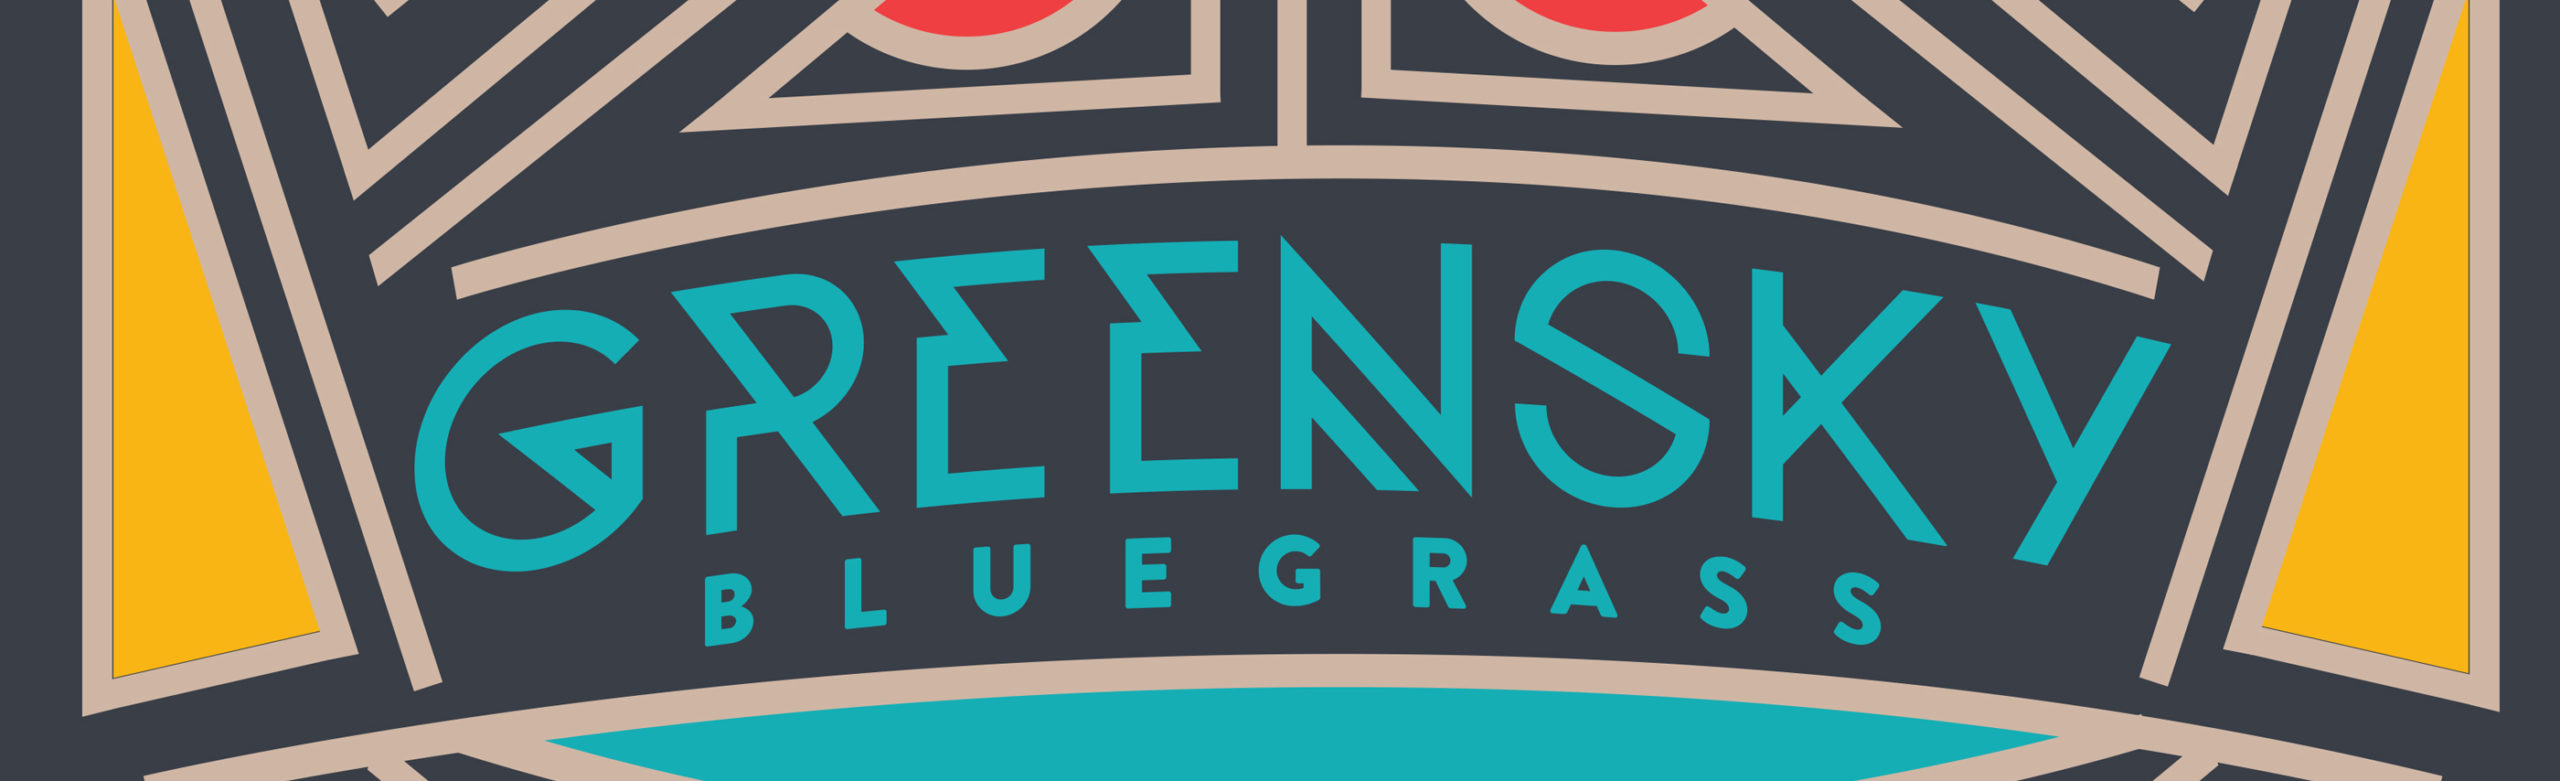 SPECIAL OFFER: Greensky Bluegrass Premium Box Seats Released Image